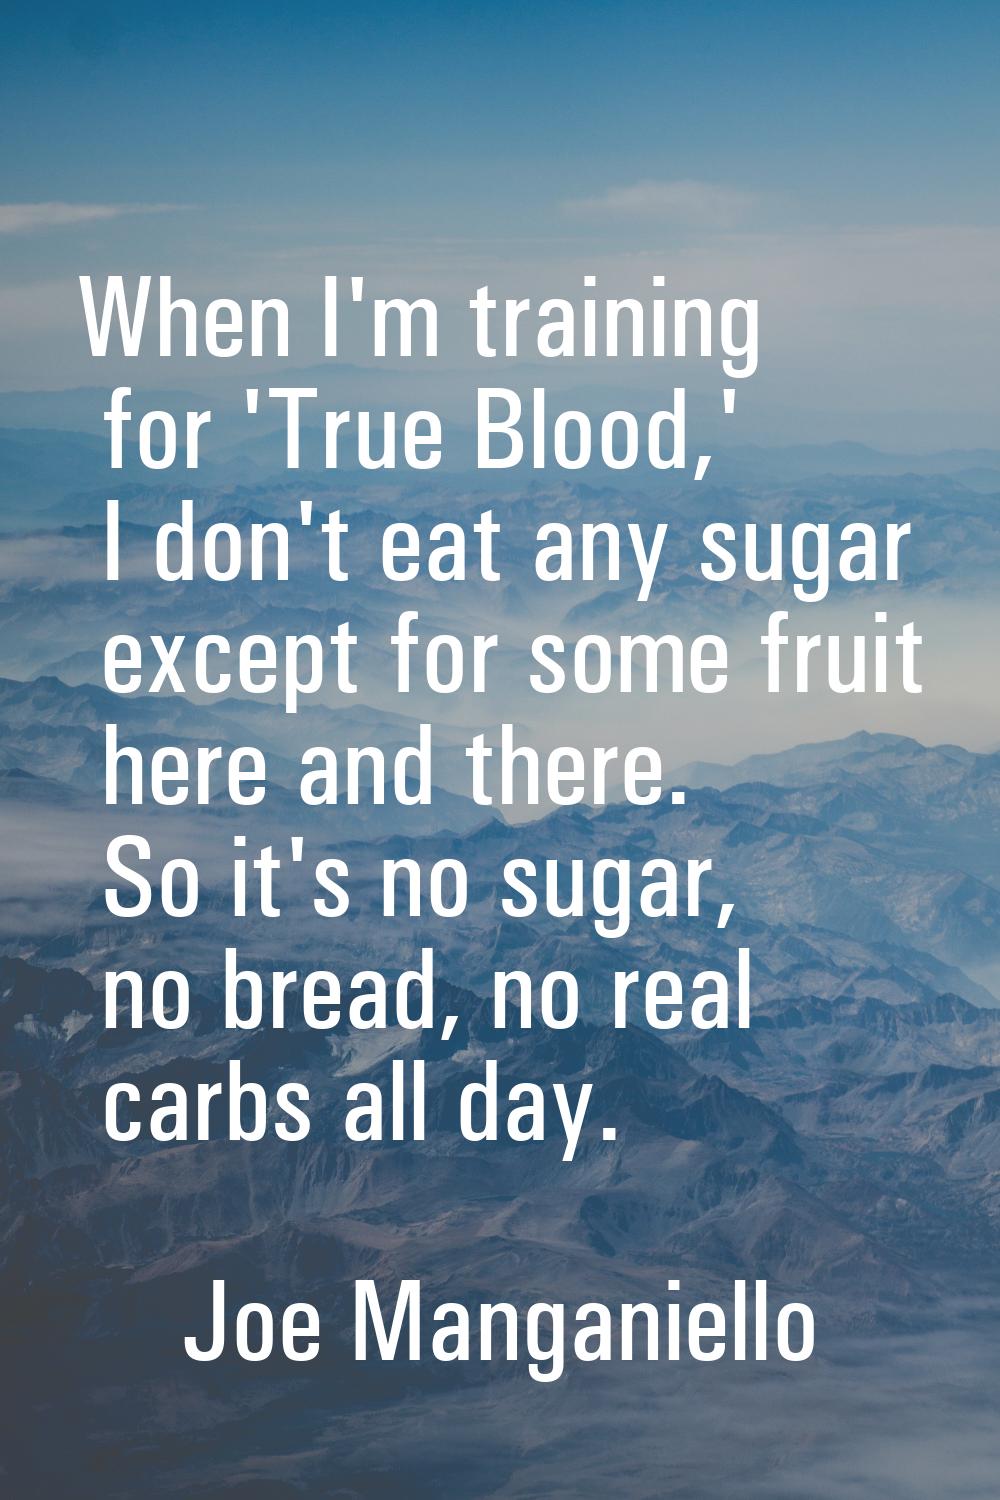 When I'm training for 'True Blood,' I don't eat any sugar except for some fruit here and there. So 